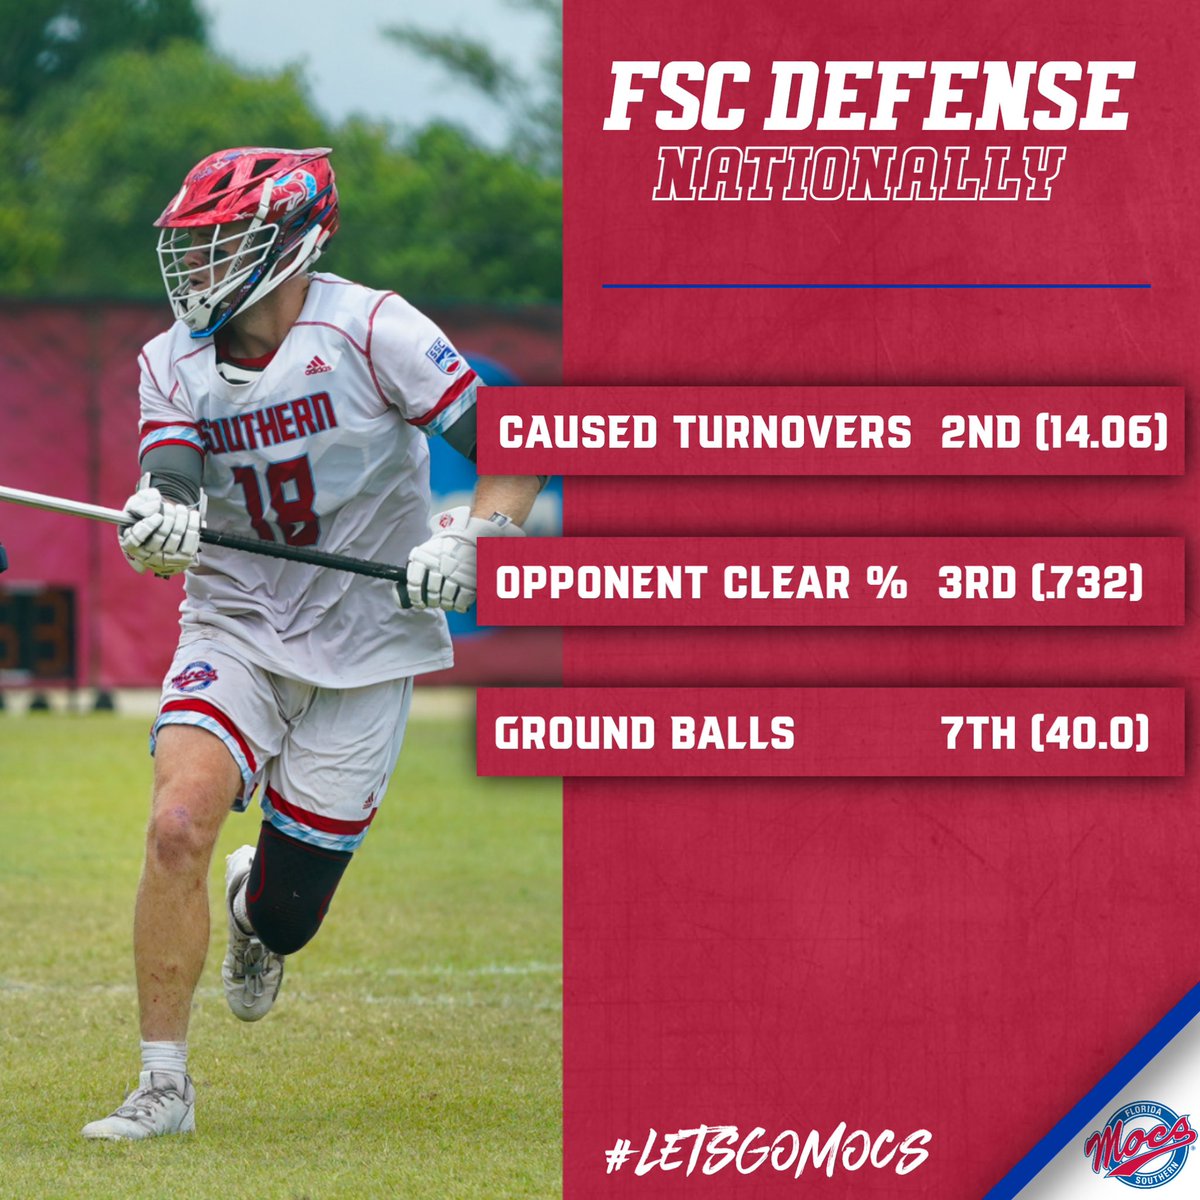 By the Numbers. The Defense caused chaos this spring 🔒🐍 #Fth #Letsgomocs